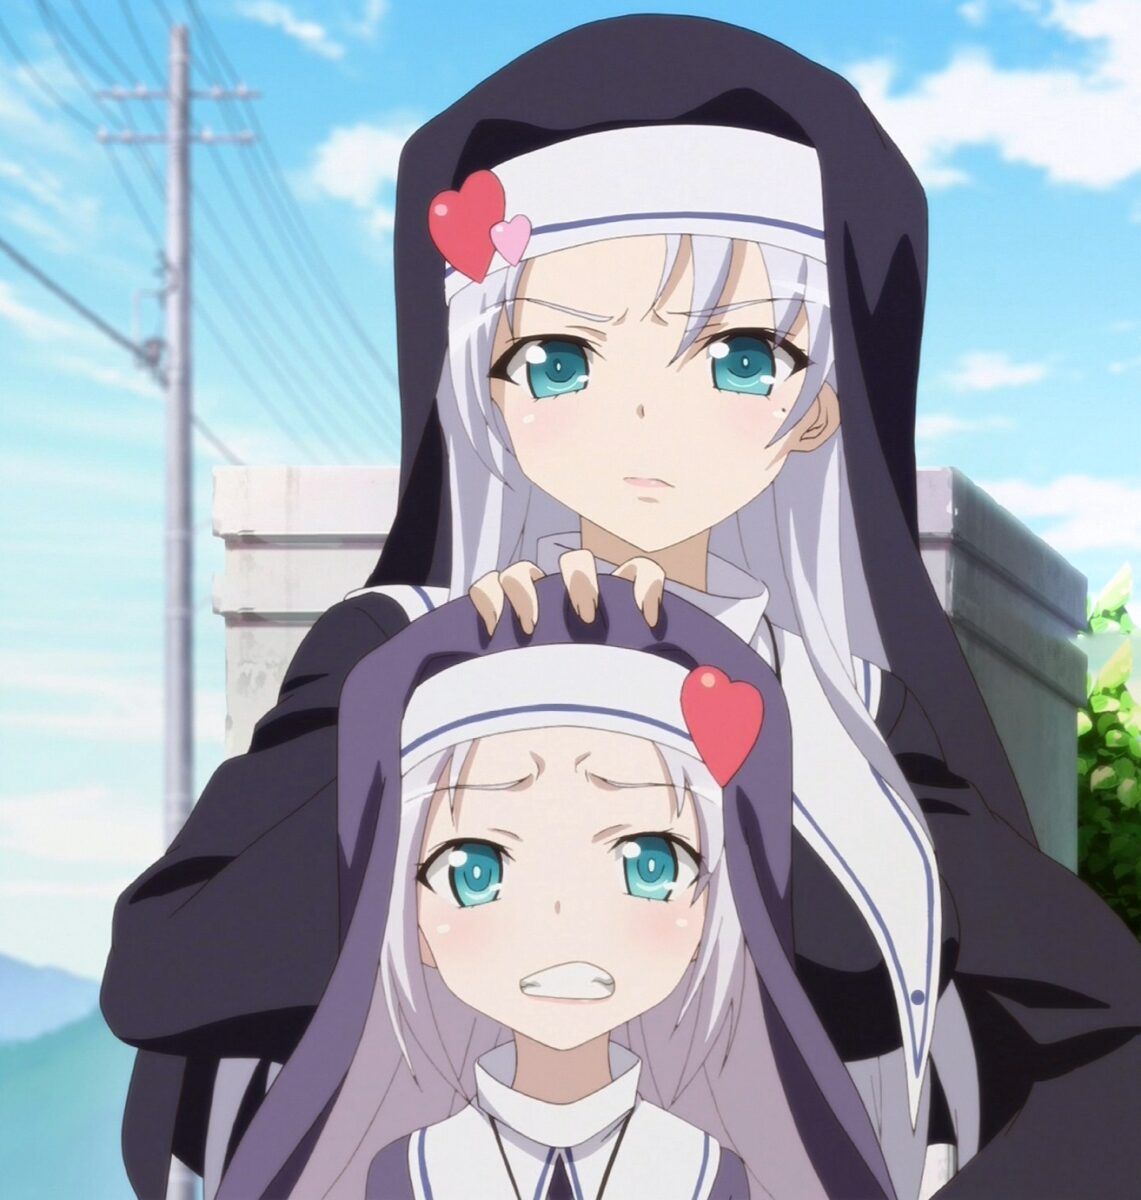 A Christian Anime!? How Christianity is Viewed in Japan! | J-List Blog